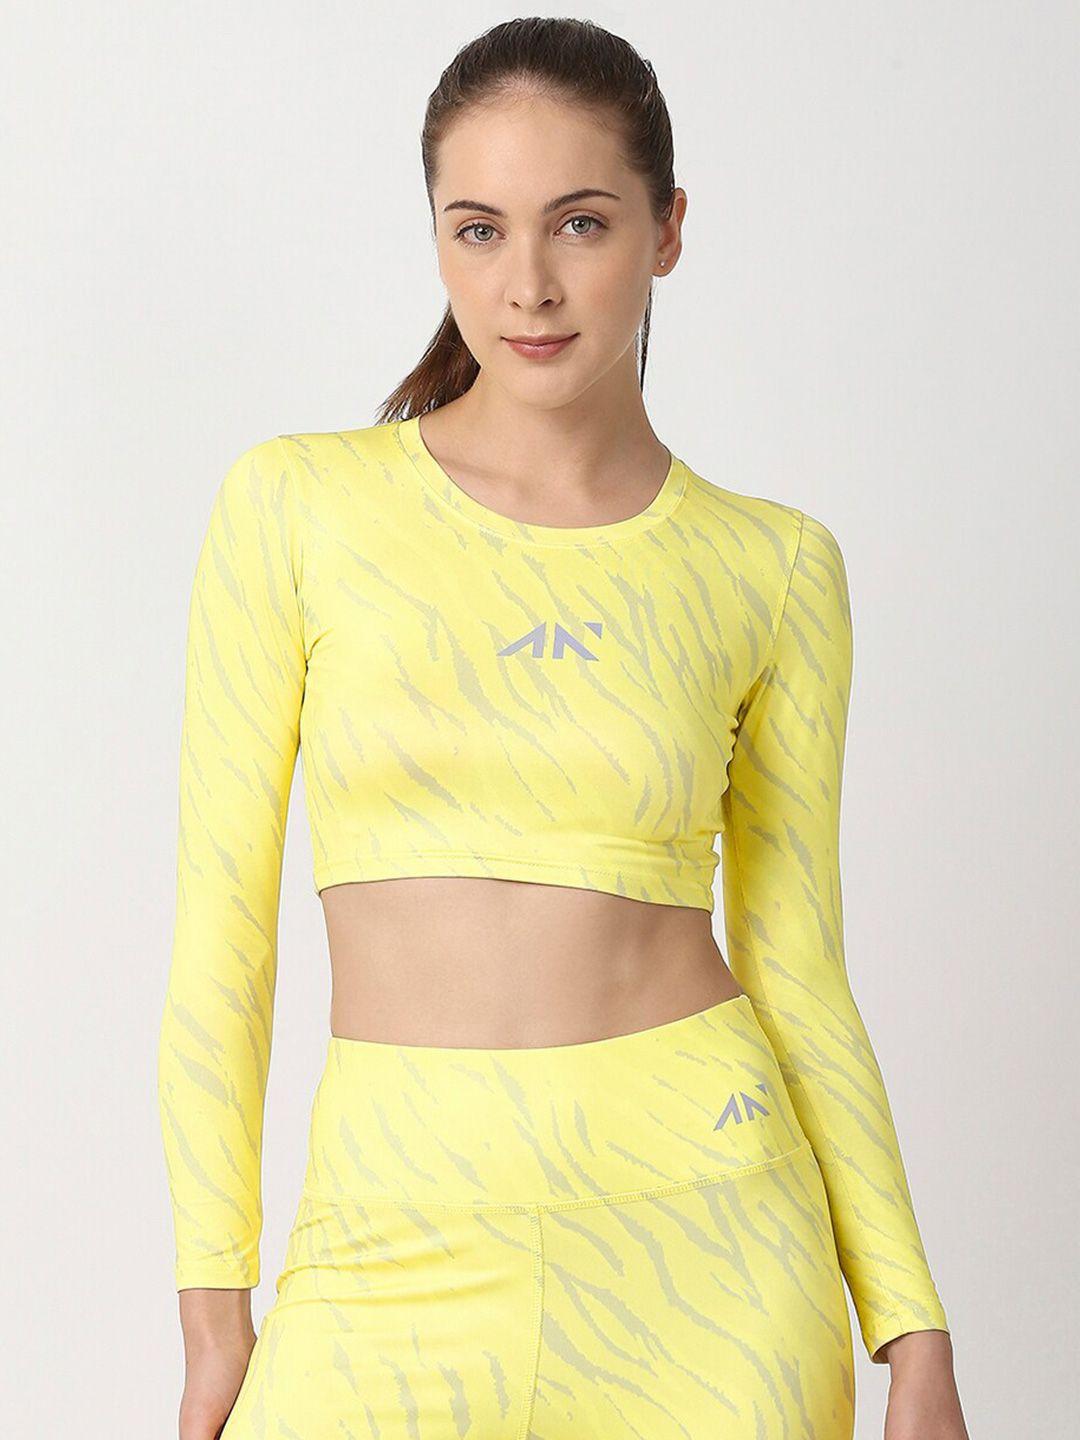 aesthetic nation women yellow animal print styled back crop top